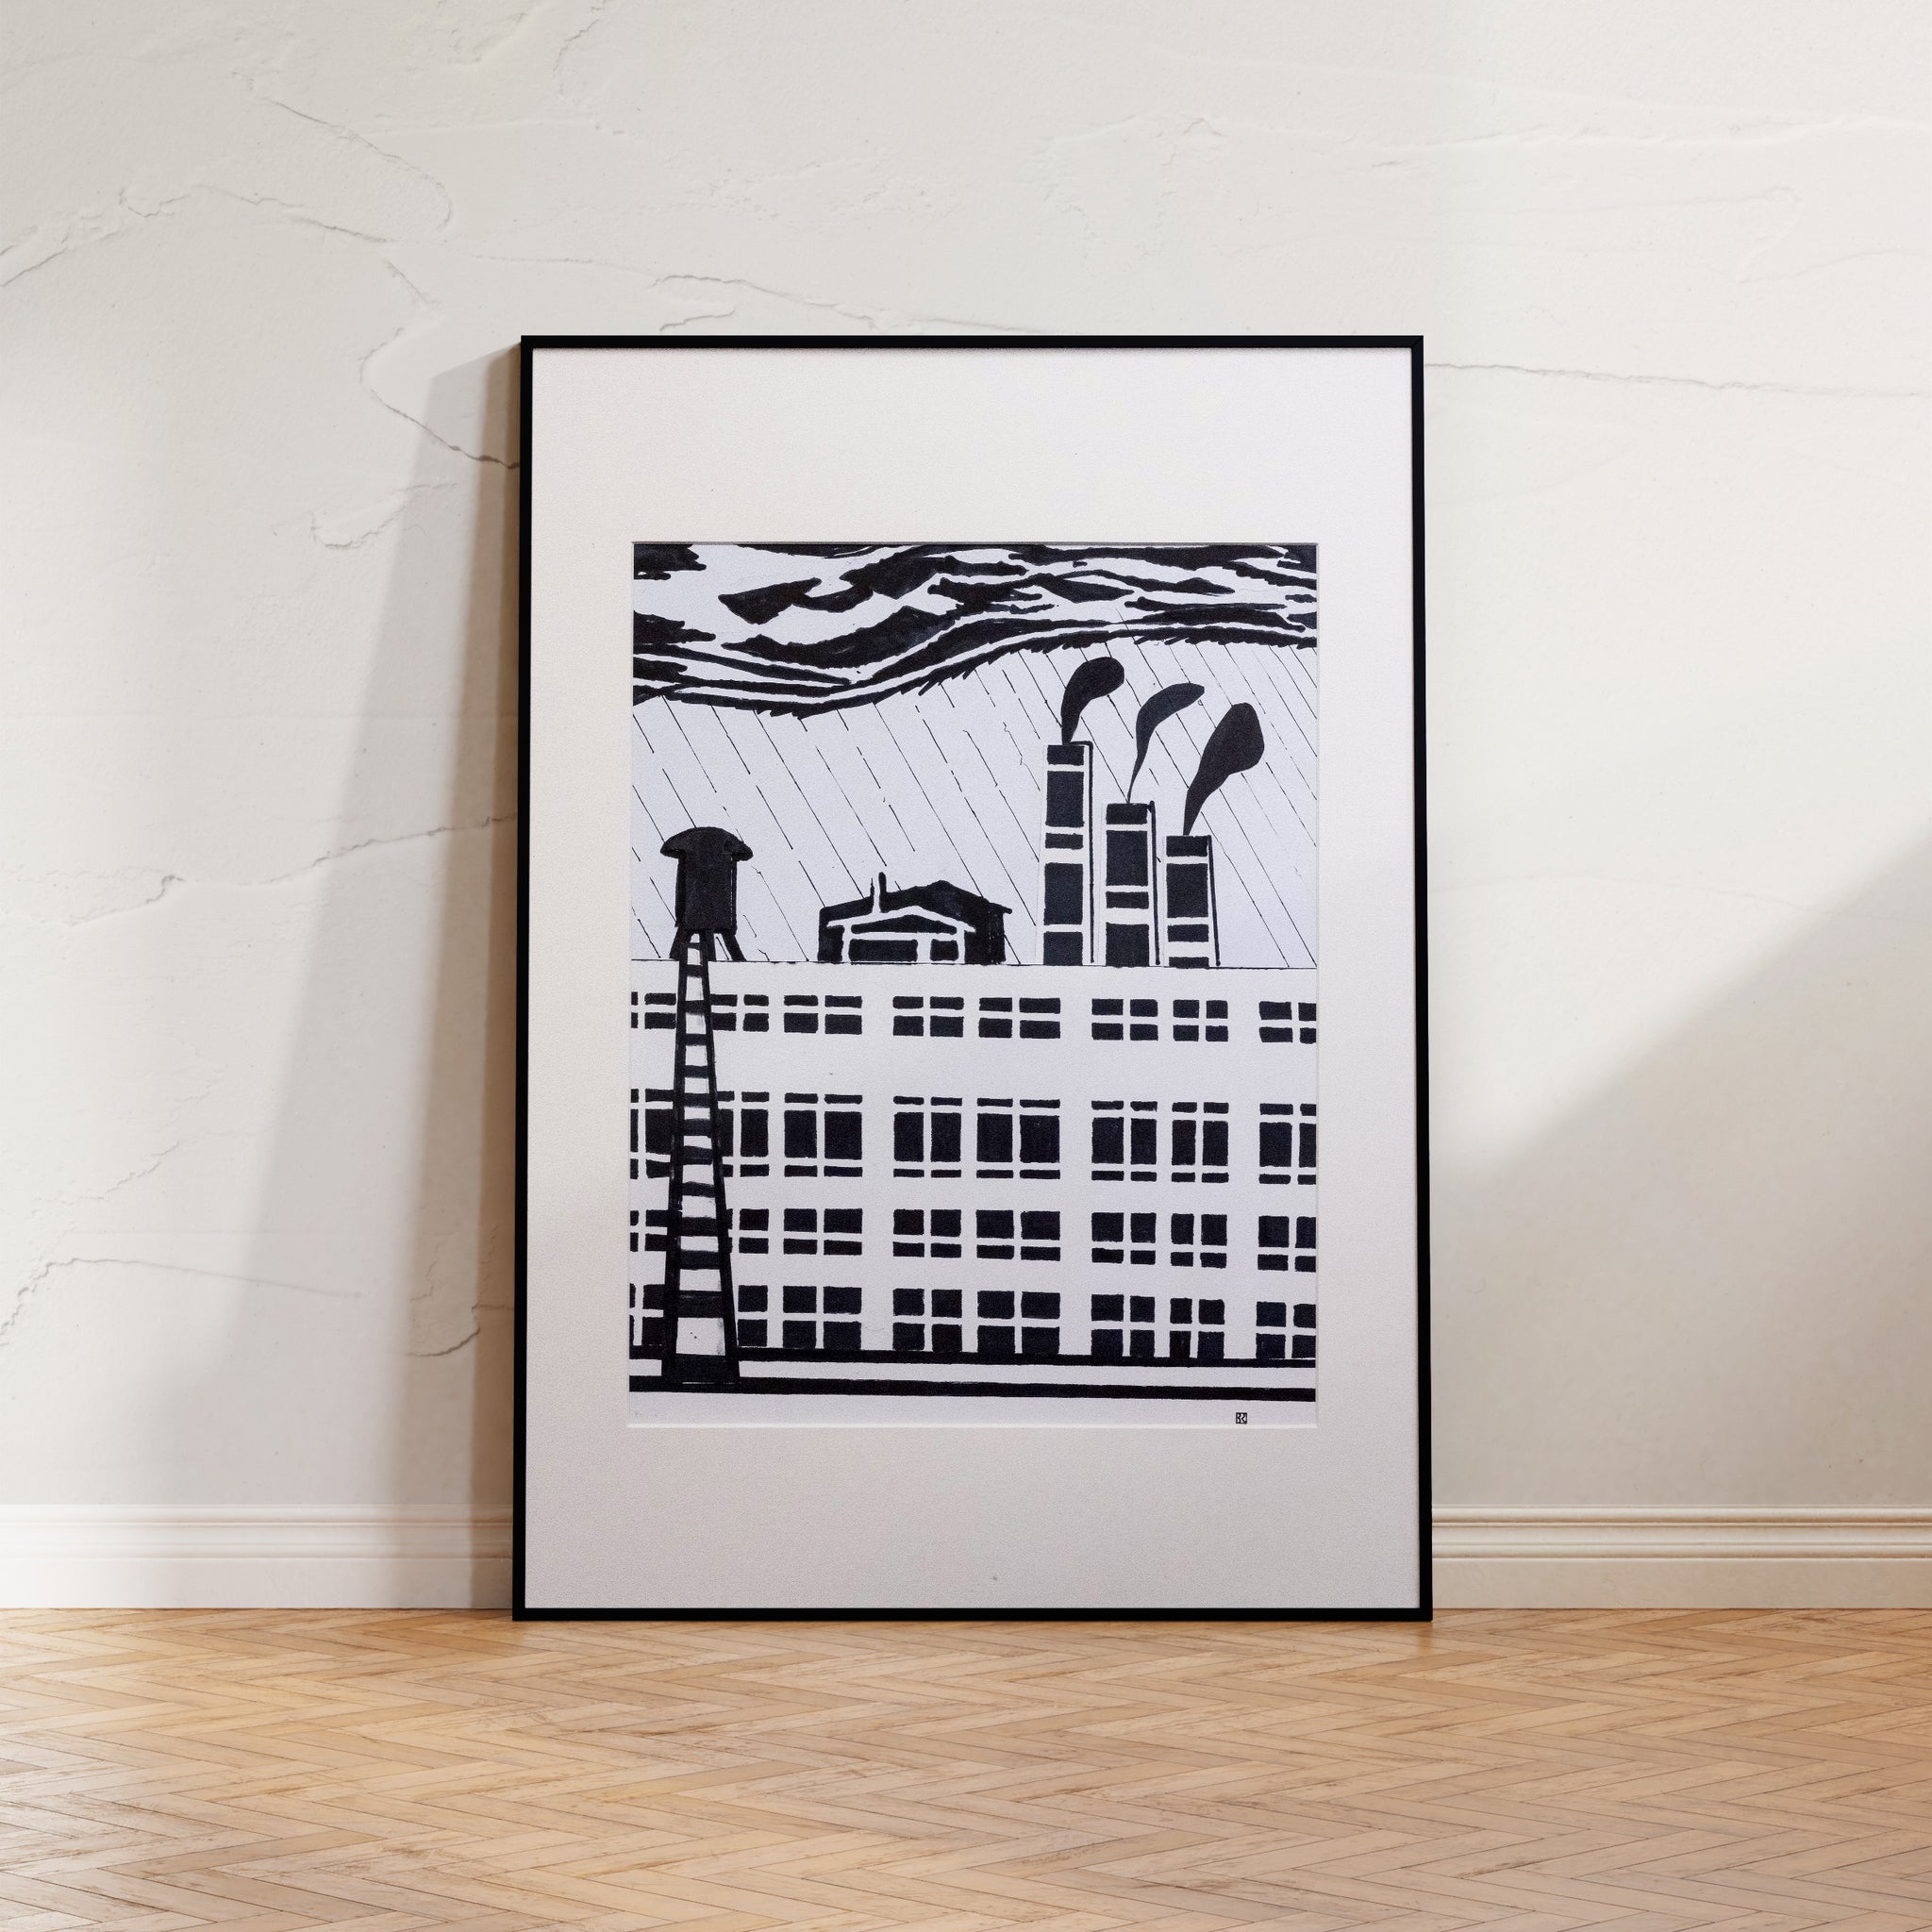 Monochromatic print 'Industrial Reverie' by Brian Findleton, portraying a grand, sunlit industrial interior with towering gears and minute figures.